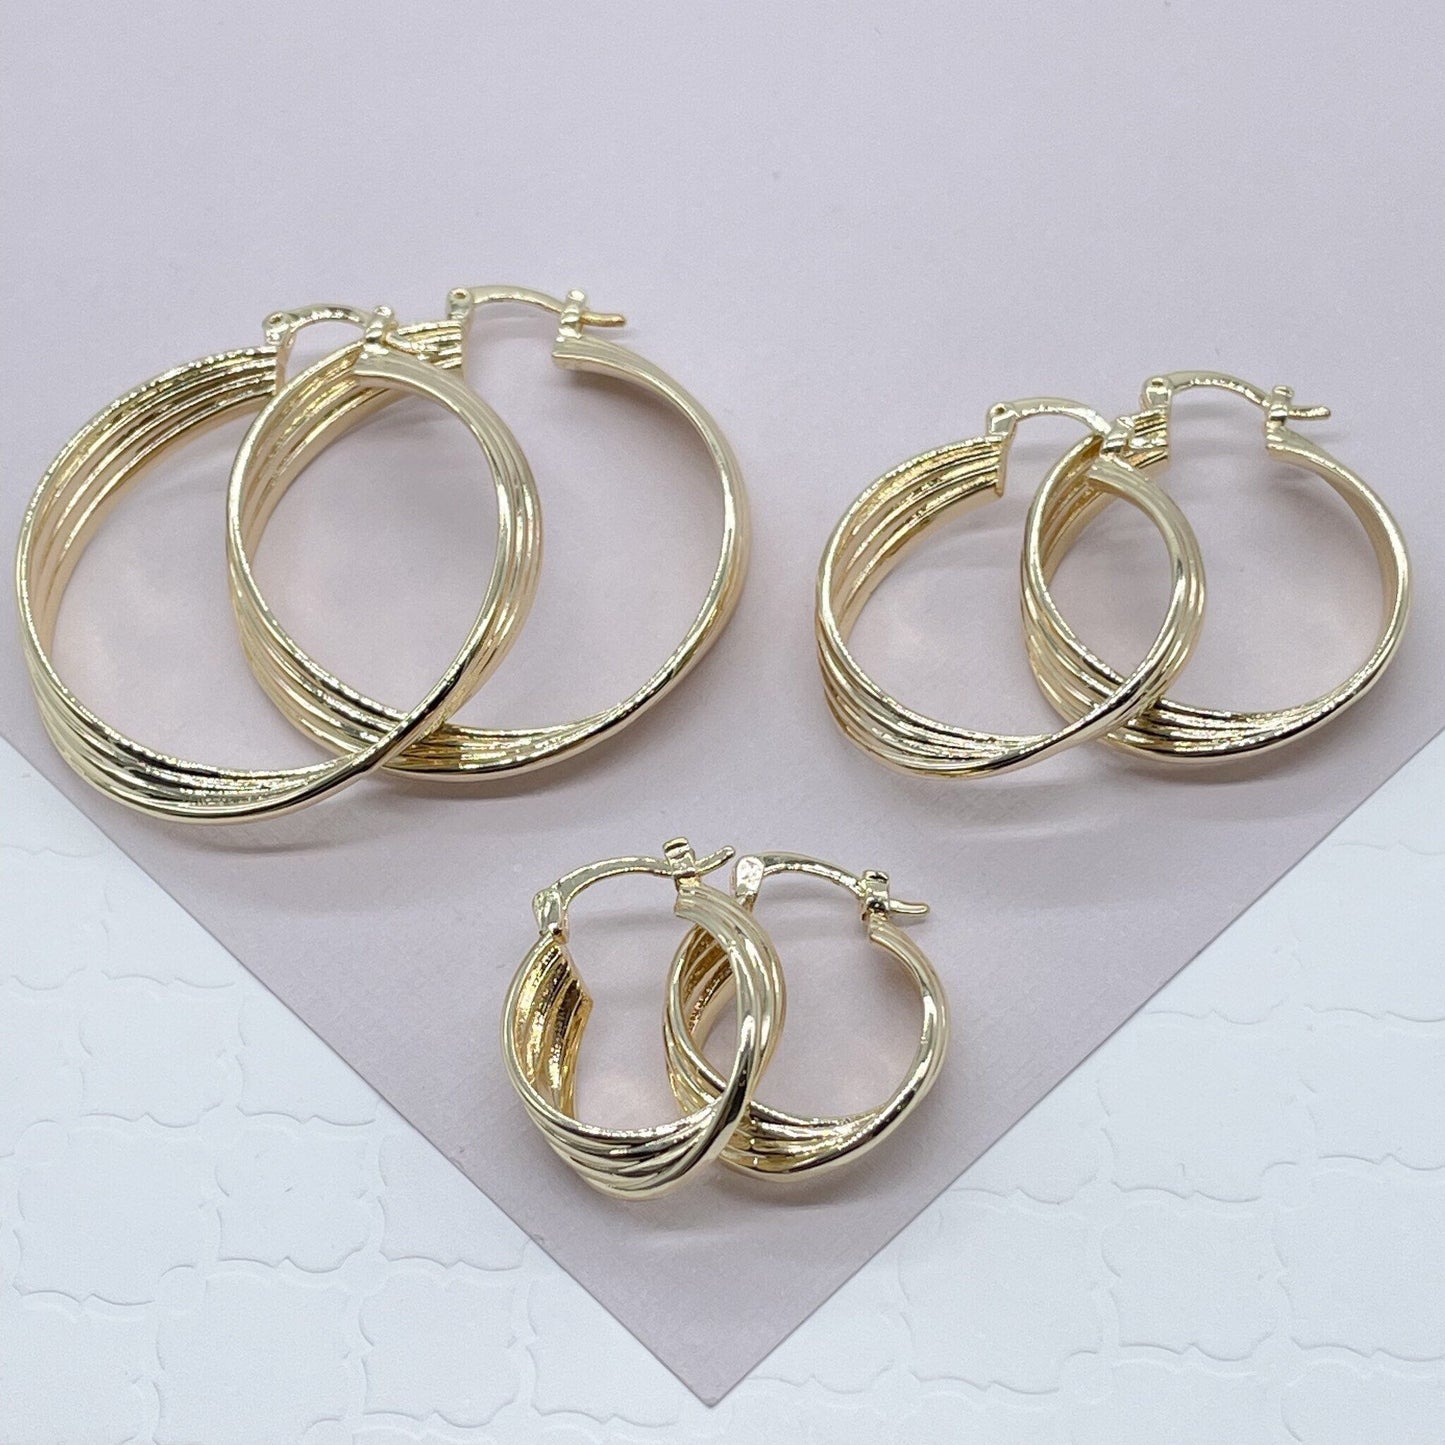 18k Gold Filled Four Layers Twisted 8mm Thick Hoop Earrings, Sizes 20mm, 30mm,